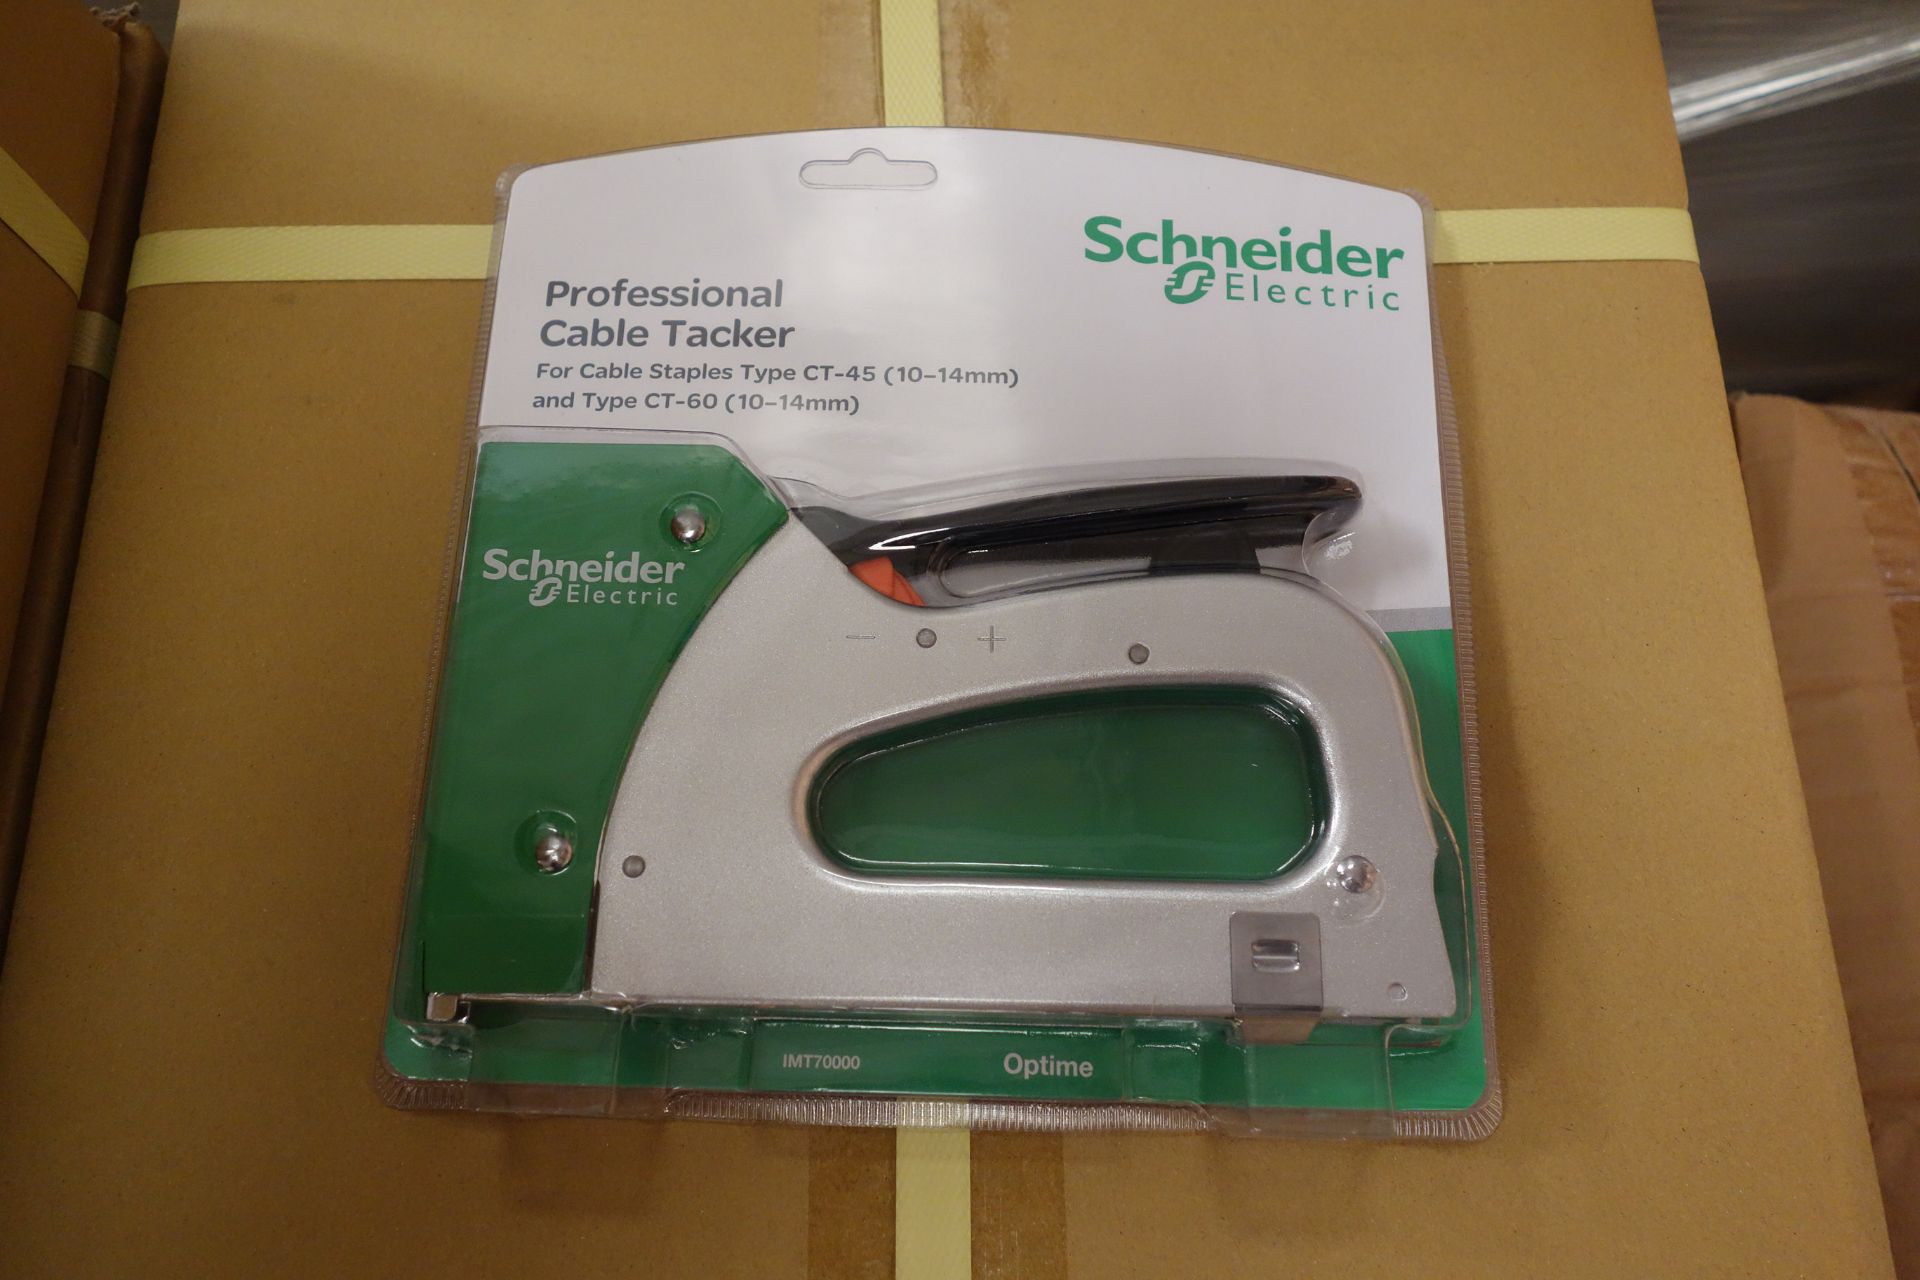 5 X Schneider IMT 7000 Professional Cable Trcker For Cable Staples Type CT-45 10-14MM + Type CT 60